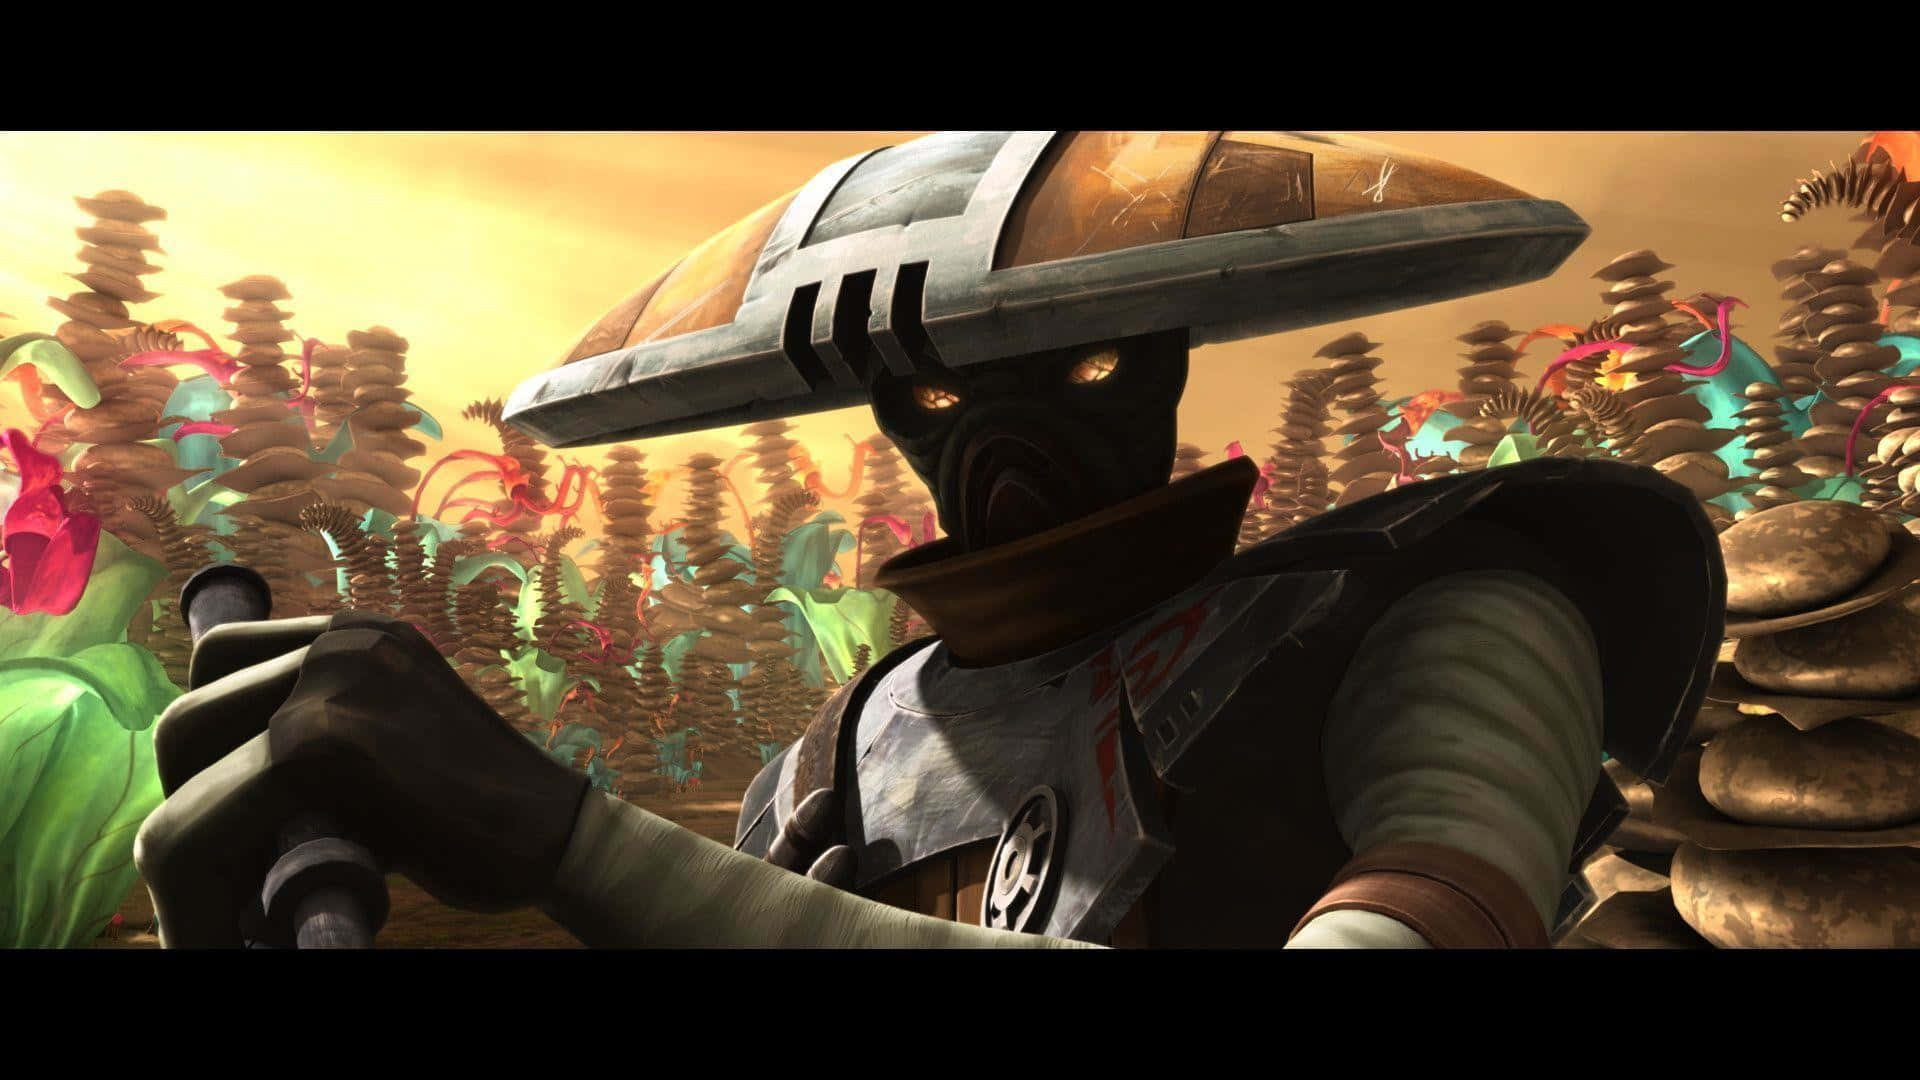 Uncover the mystery behind The War Of The Bounty Hunters Wallpaper